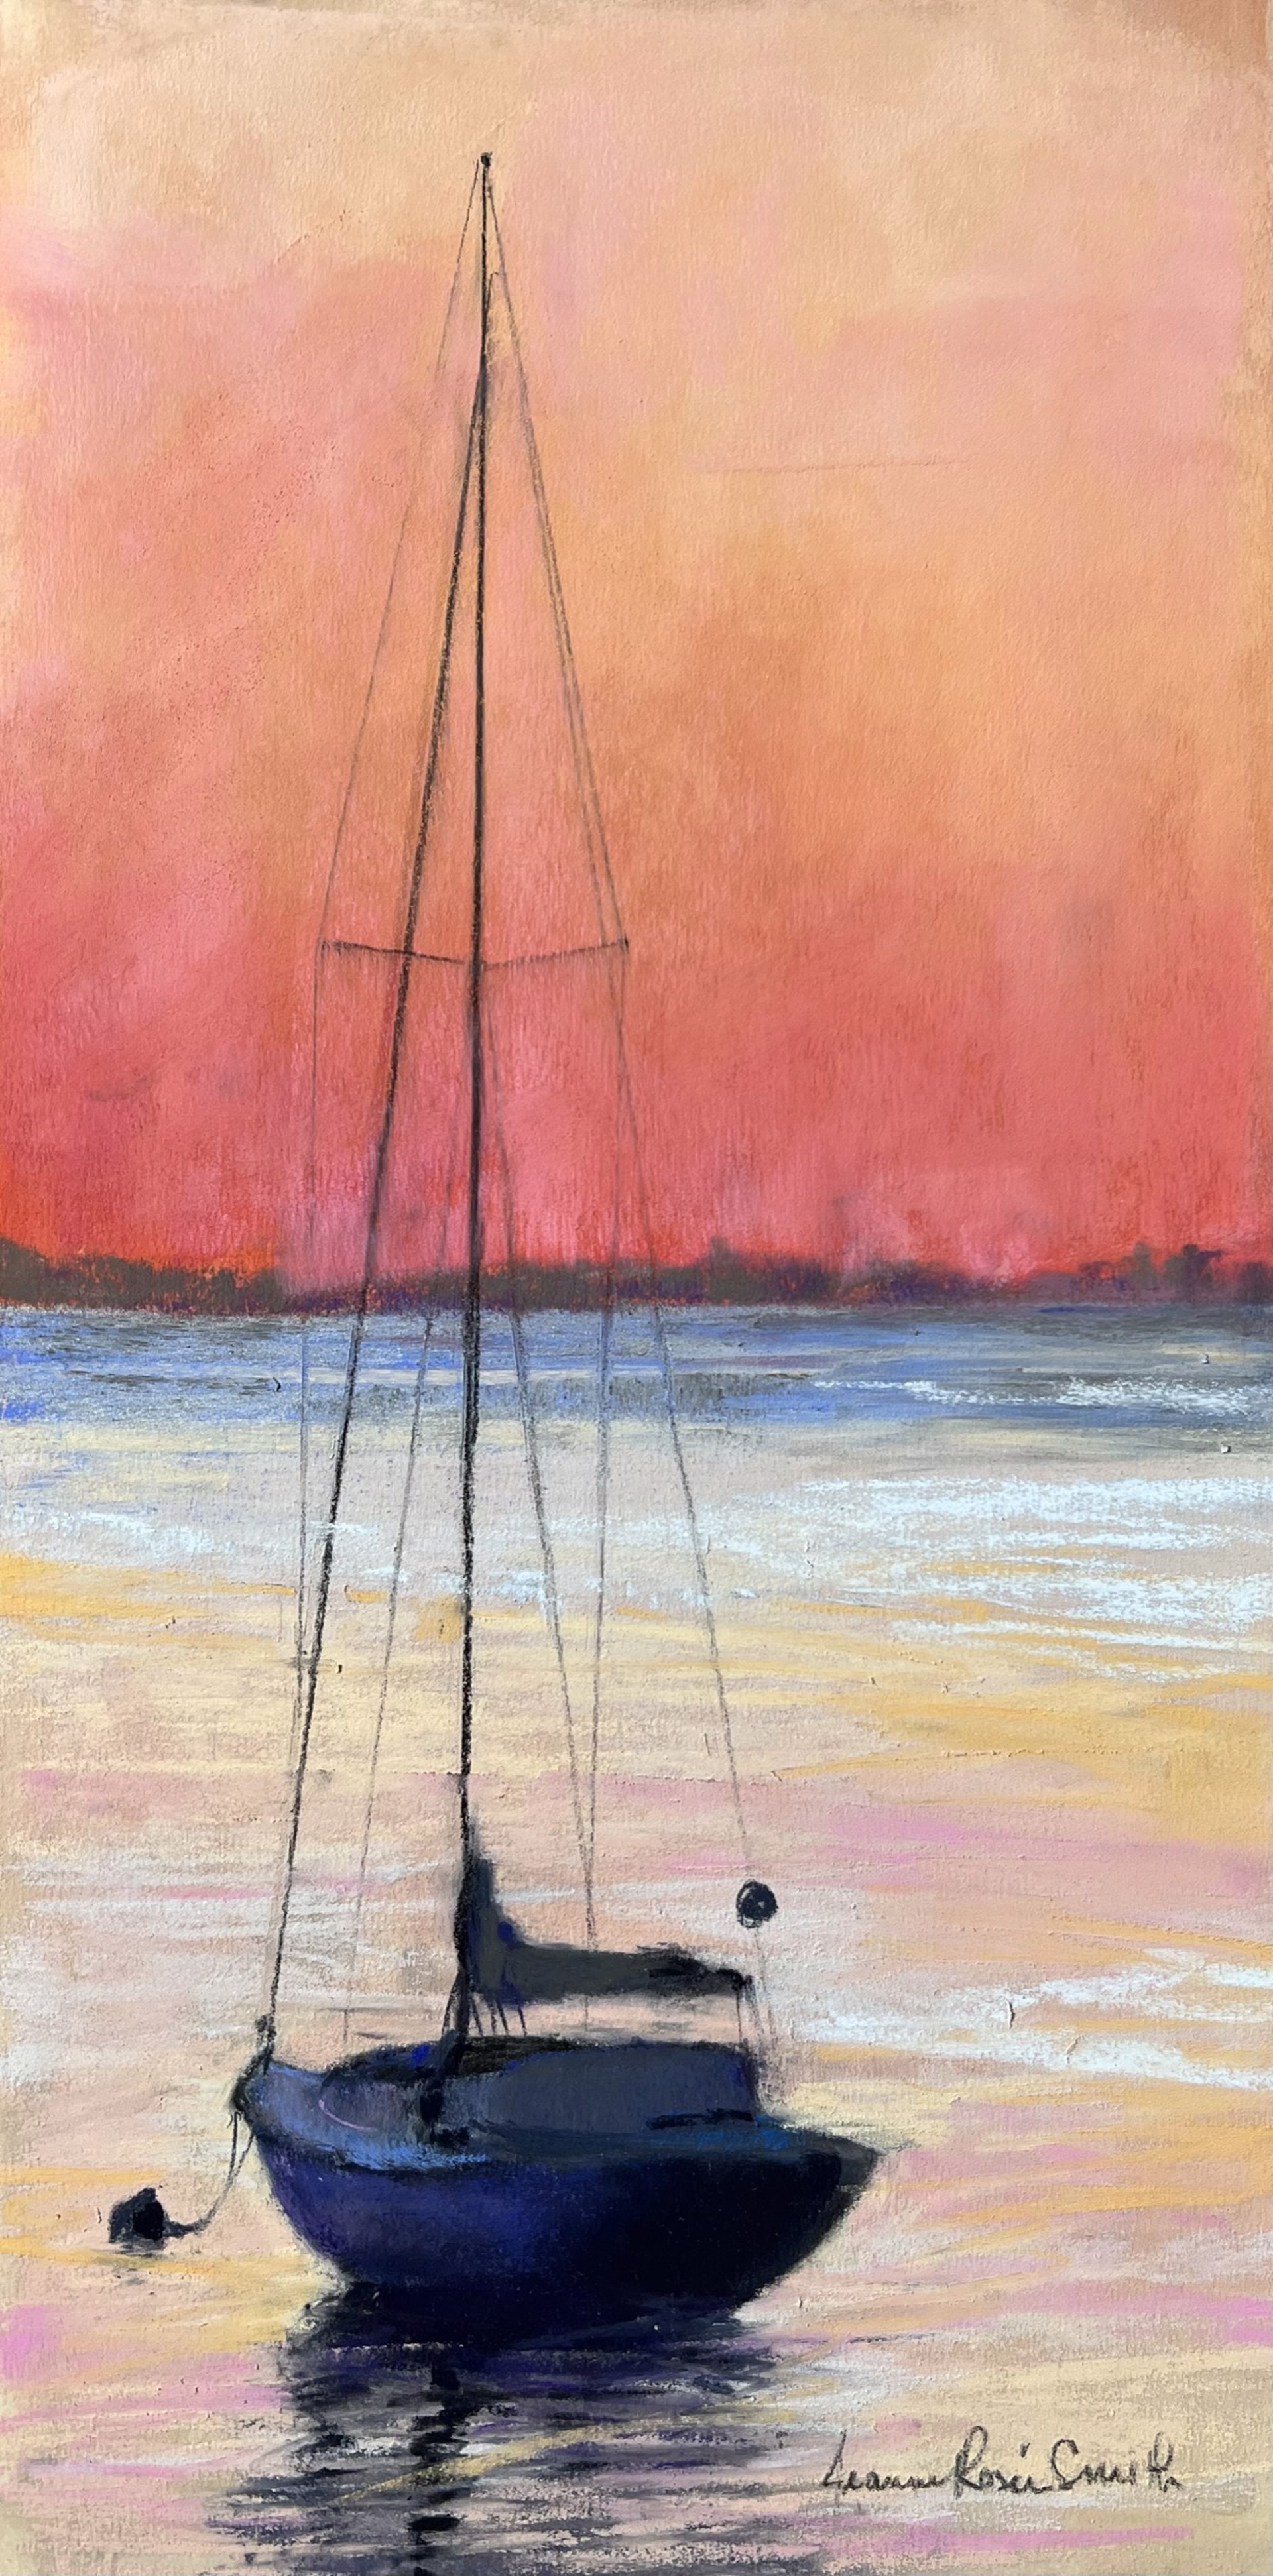 Sailor's Delight by Jeanne Rosier Smith